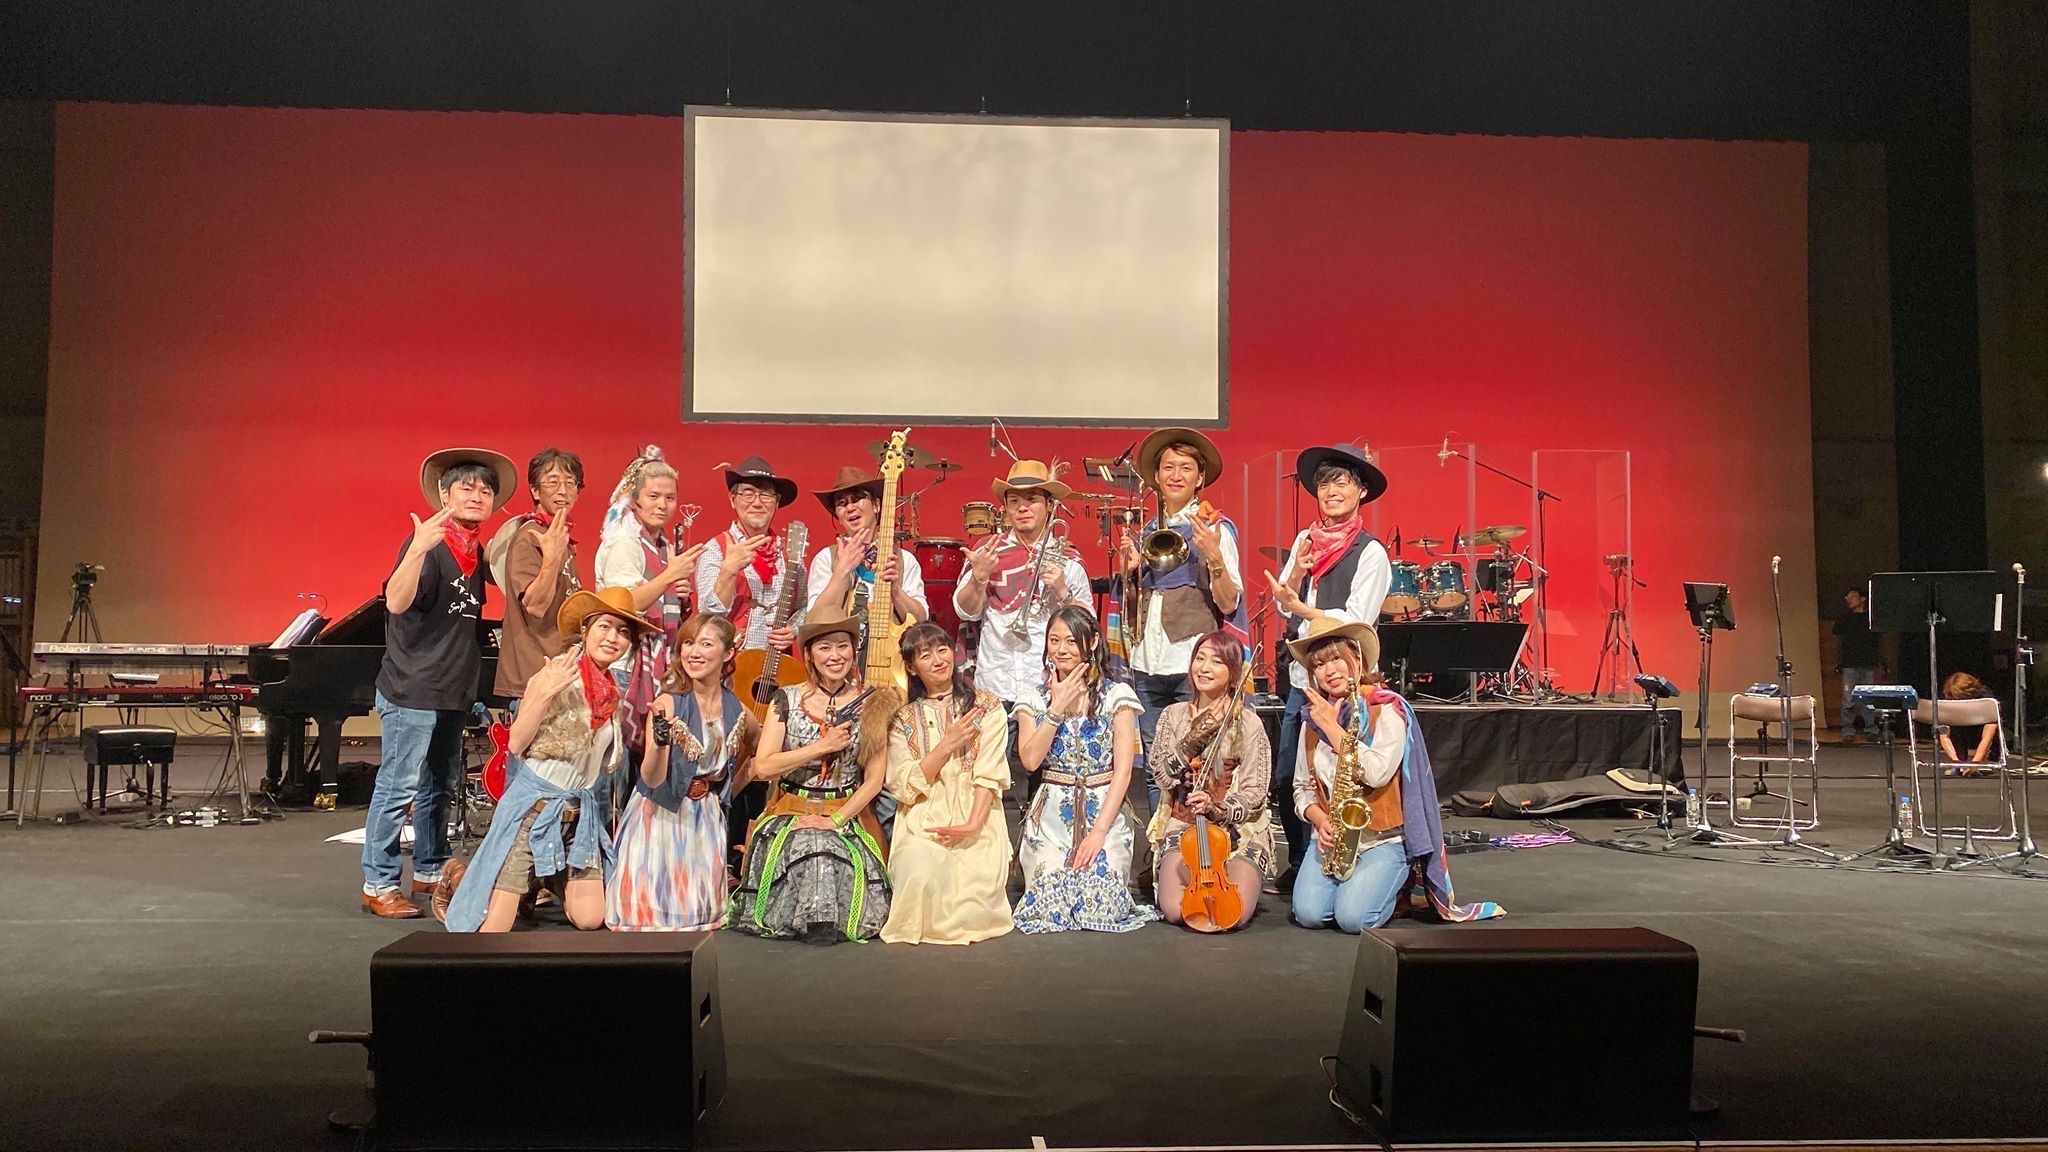 “Score Re;Fire #2 WILD ARMS Vocal Songs Concert 2019 “渡り鳥バンドメンバーとして出演